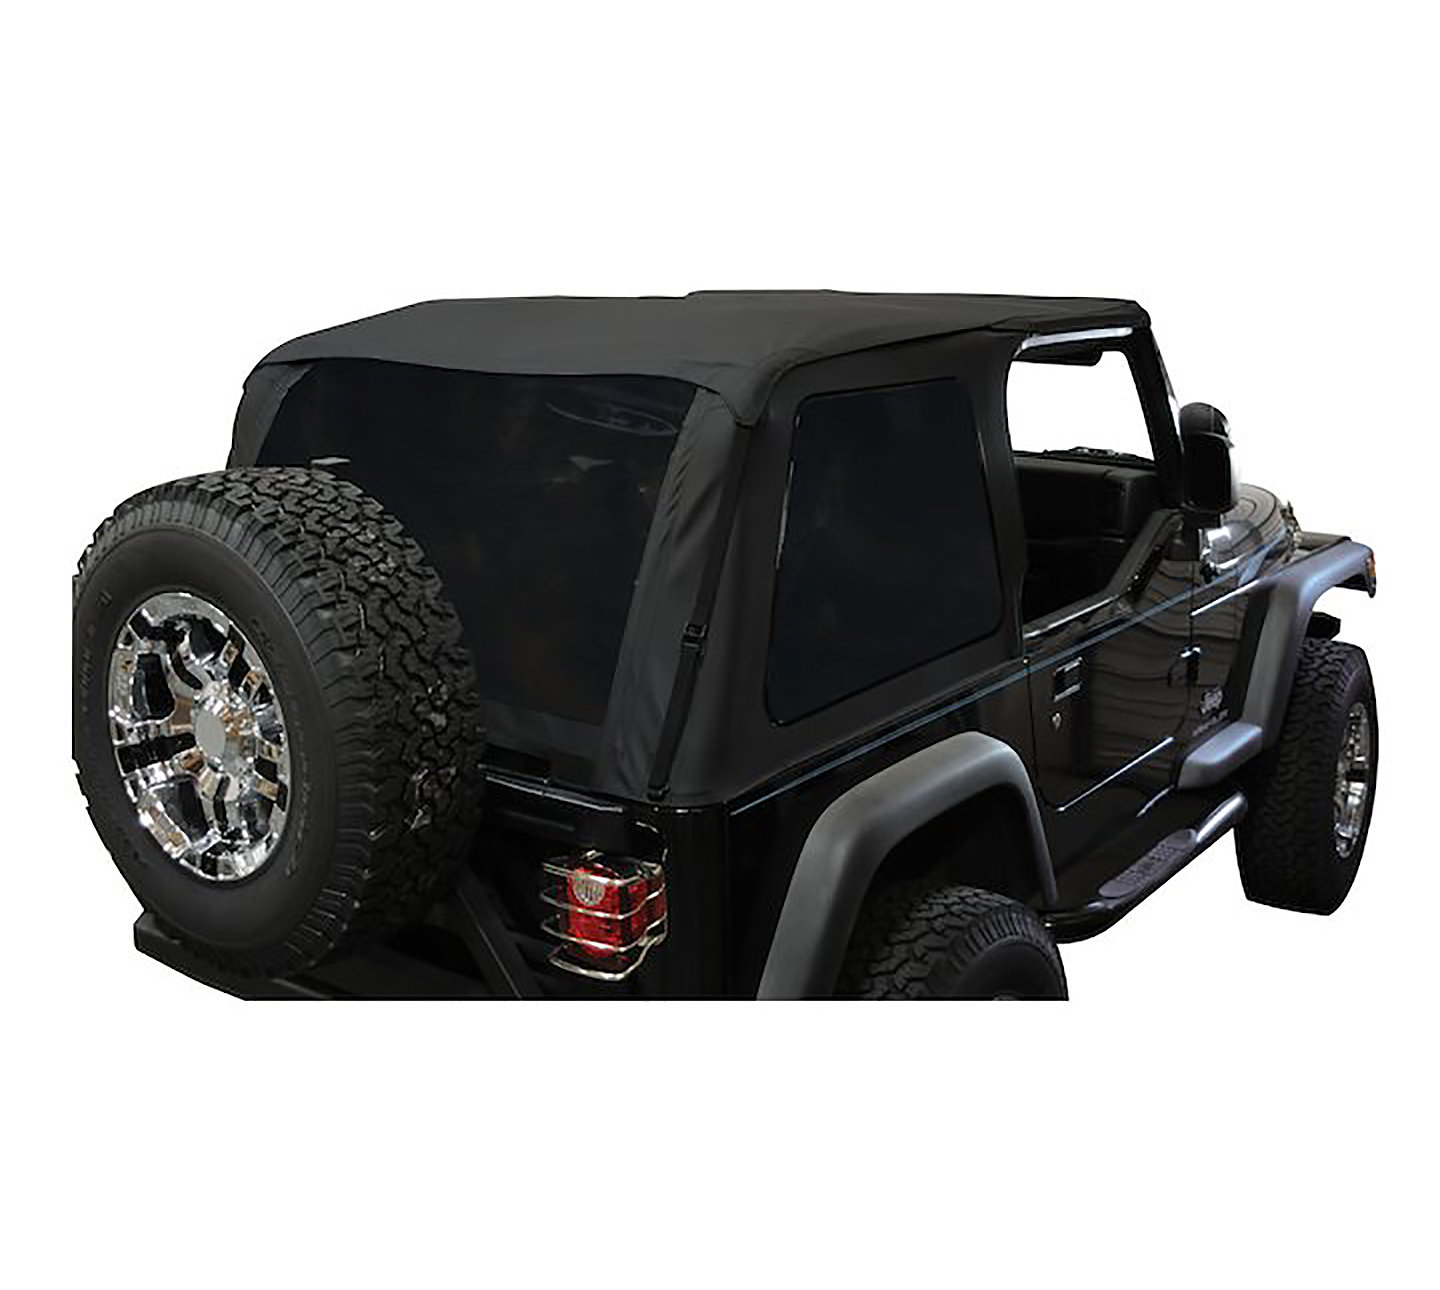 Crown Automotive Bowless Soft Top with Tinted Windows for 97-06 Jeep  Wrangler TJ | Quadratec